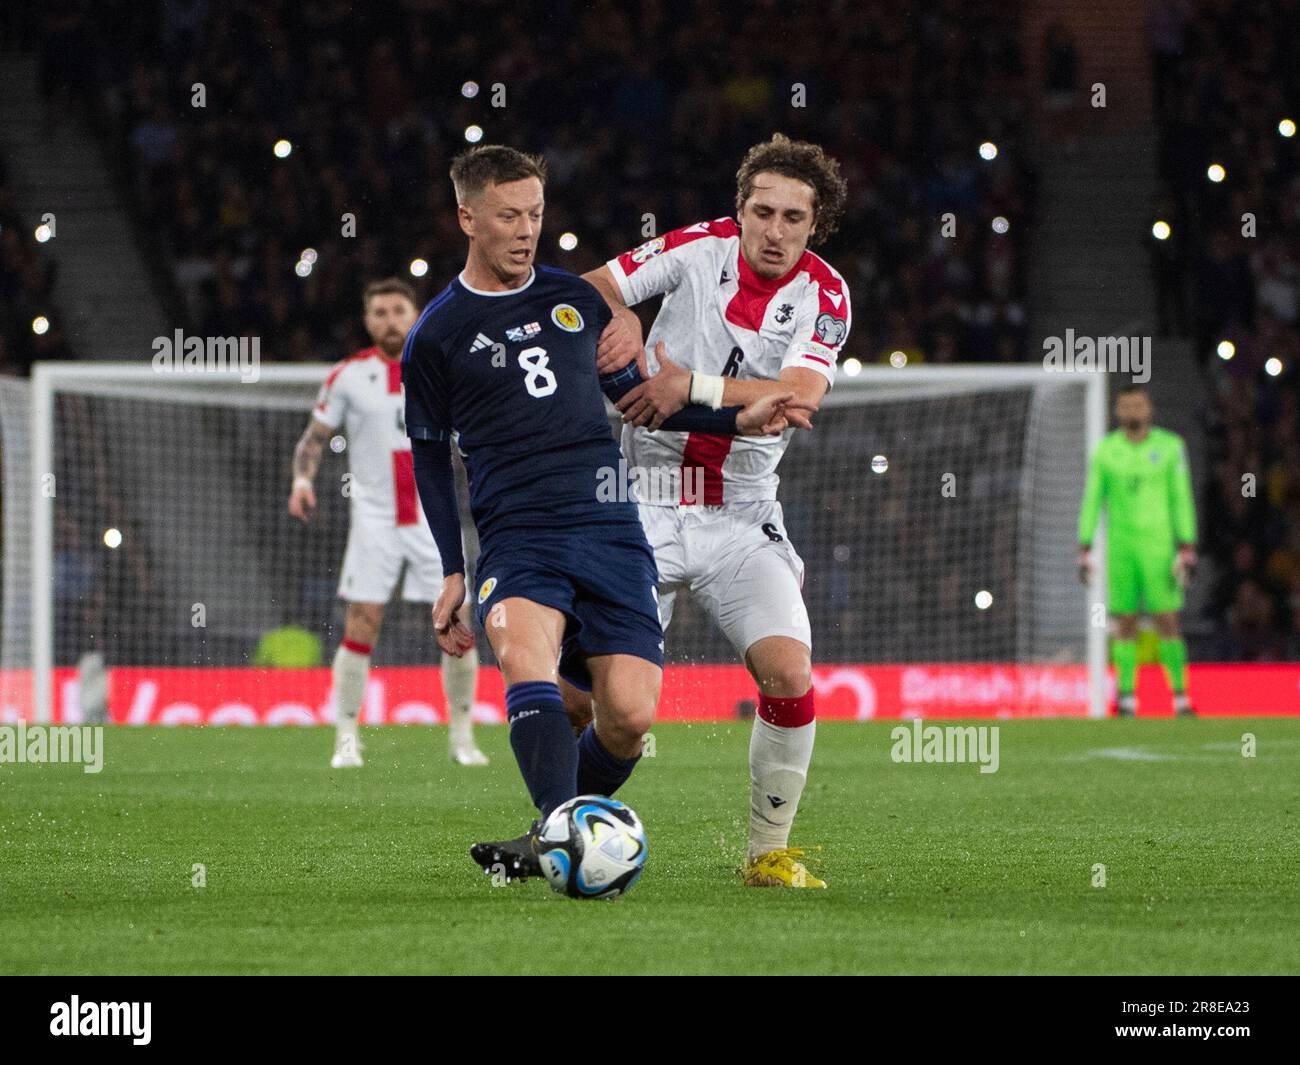 GLASGOW, SCOTLAND - JUNE 20: Georgia midfielder, Luka Gagnidze, attempts to tackle Scotland midfielder, Callum McGregor, during the UEFA EURO 2024 qualifying round group A match between Scotland and Georgia at Hampden Park on June 20, 2023 in Glasgow, Scotland. (Photo by Ian Jacobs/MB Media/) Stock Photo